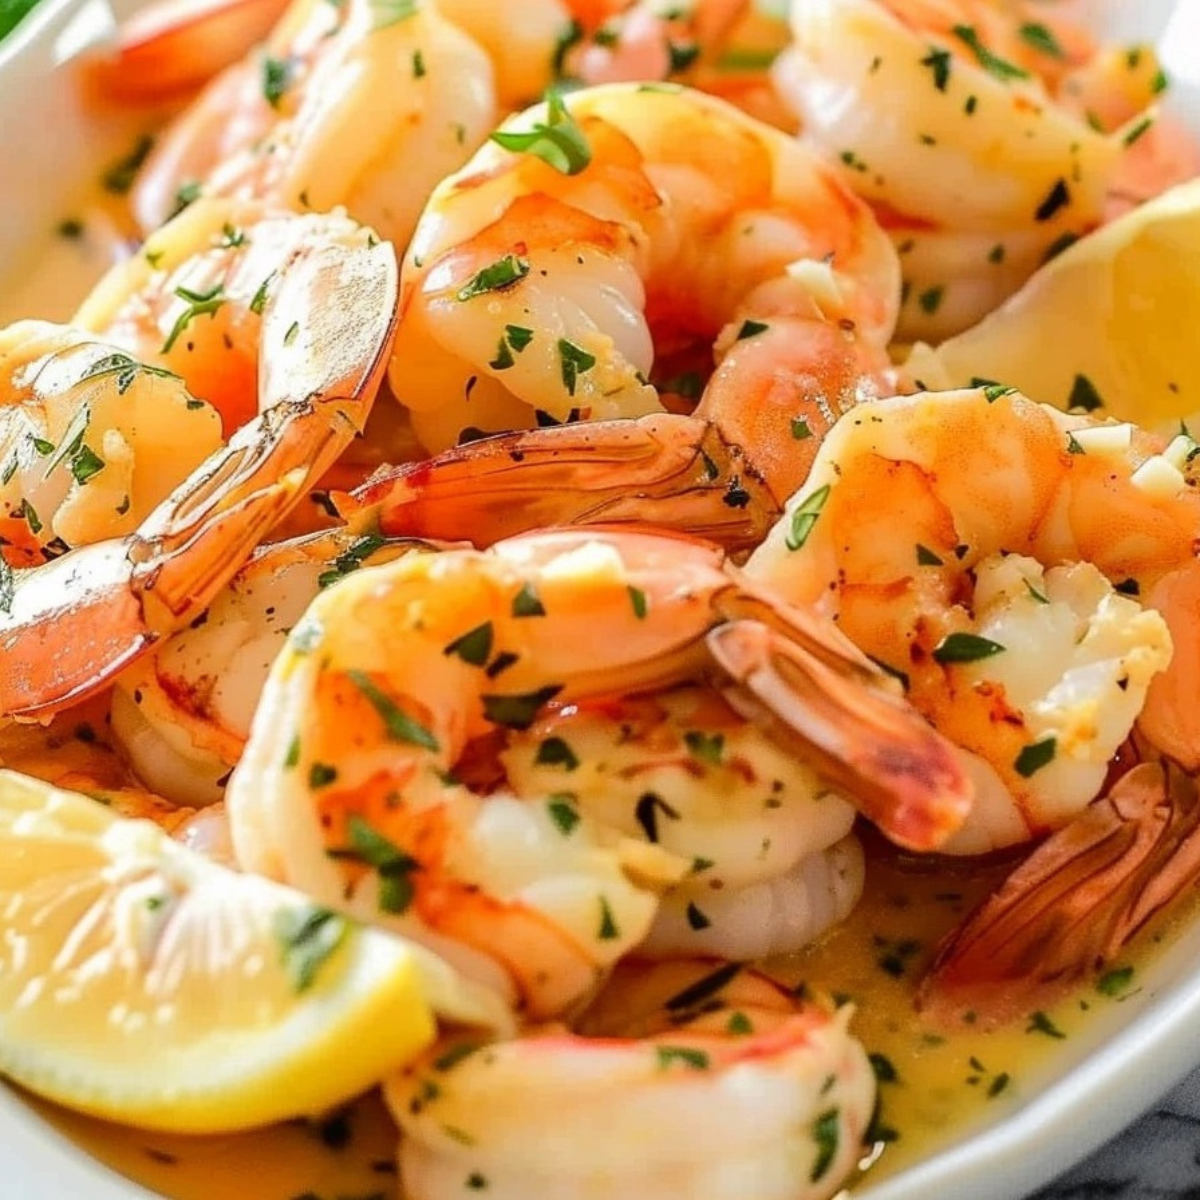 Garlic butter shrimp served in a white plate.